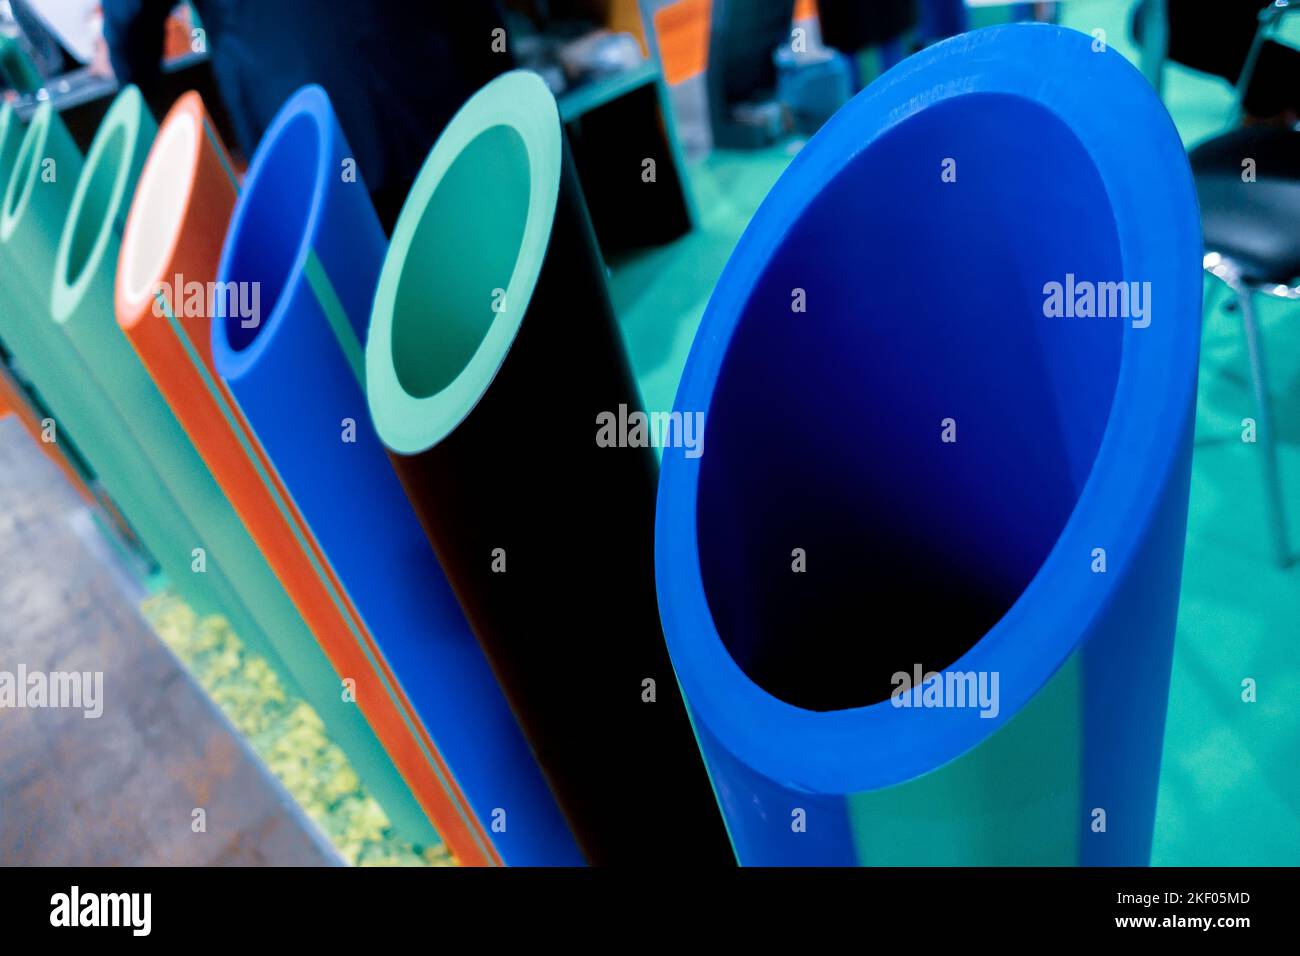 Cross-section of multicolored large diameter plastic pipes. Stock Photo